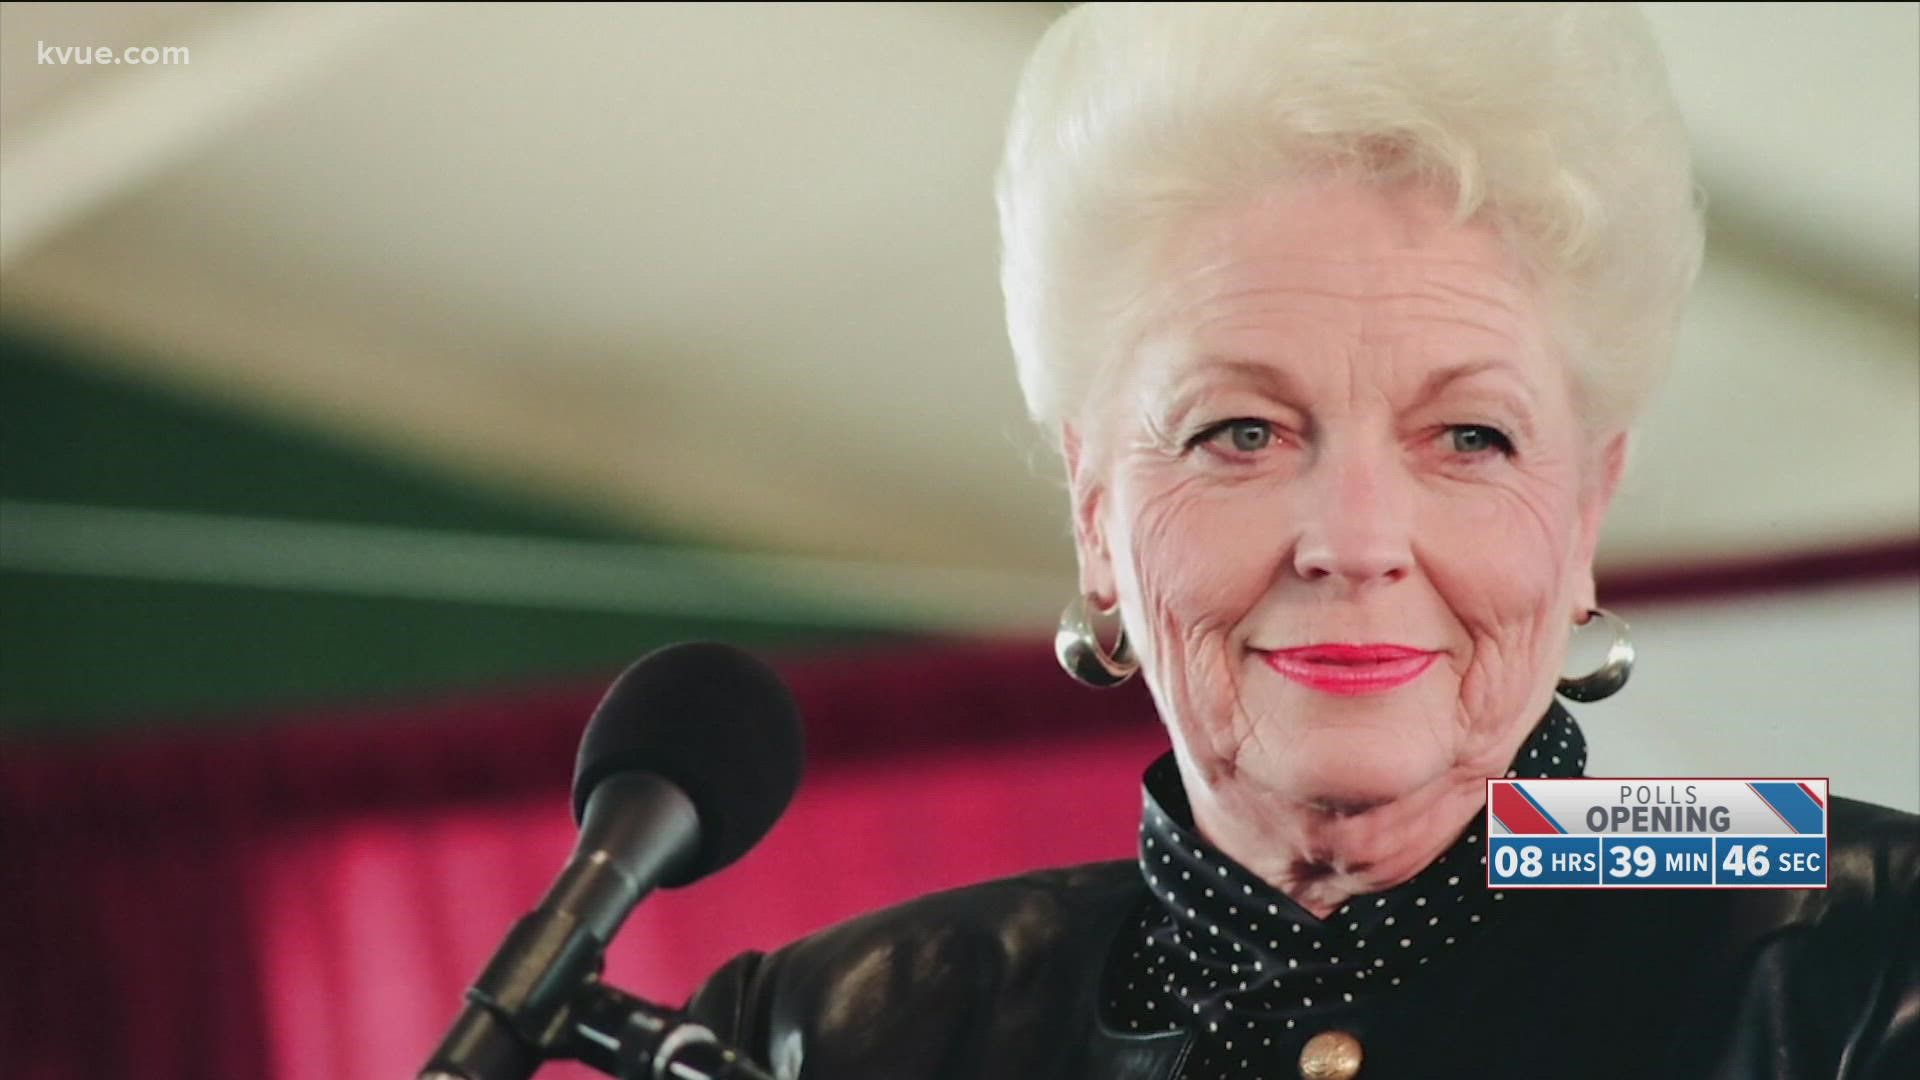 On this edition of The Backstory, we look at Ann Richards' path to the Texas Governor's Mansion. The 1990 primary is where it all began.